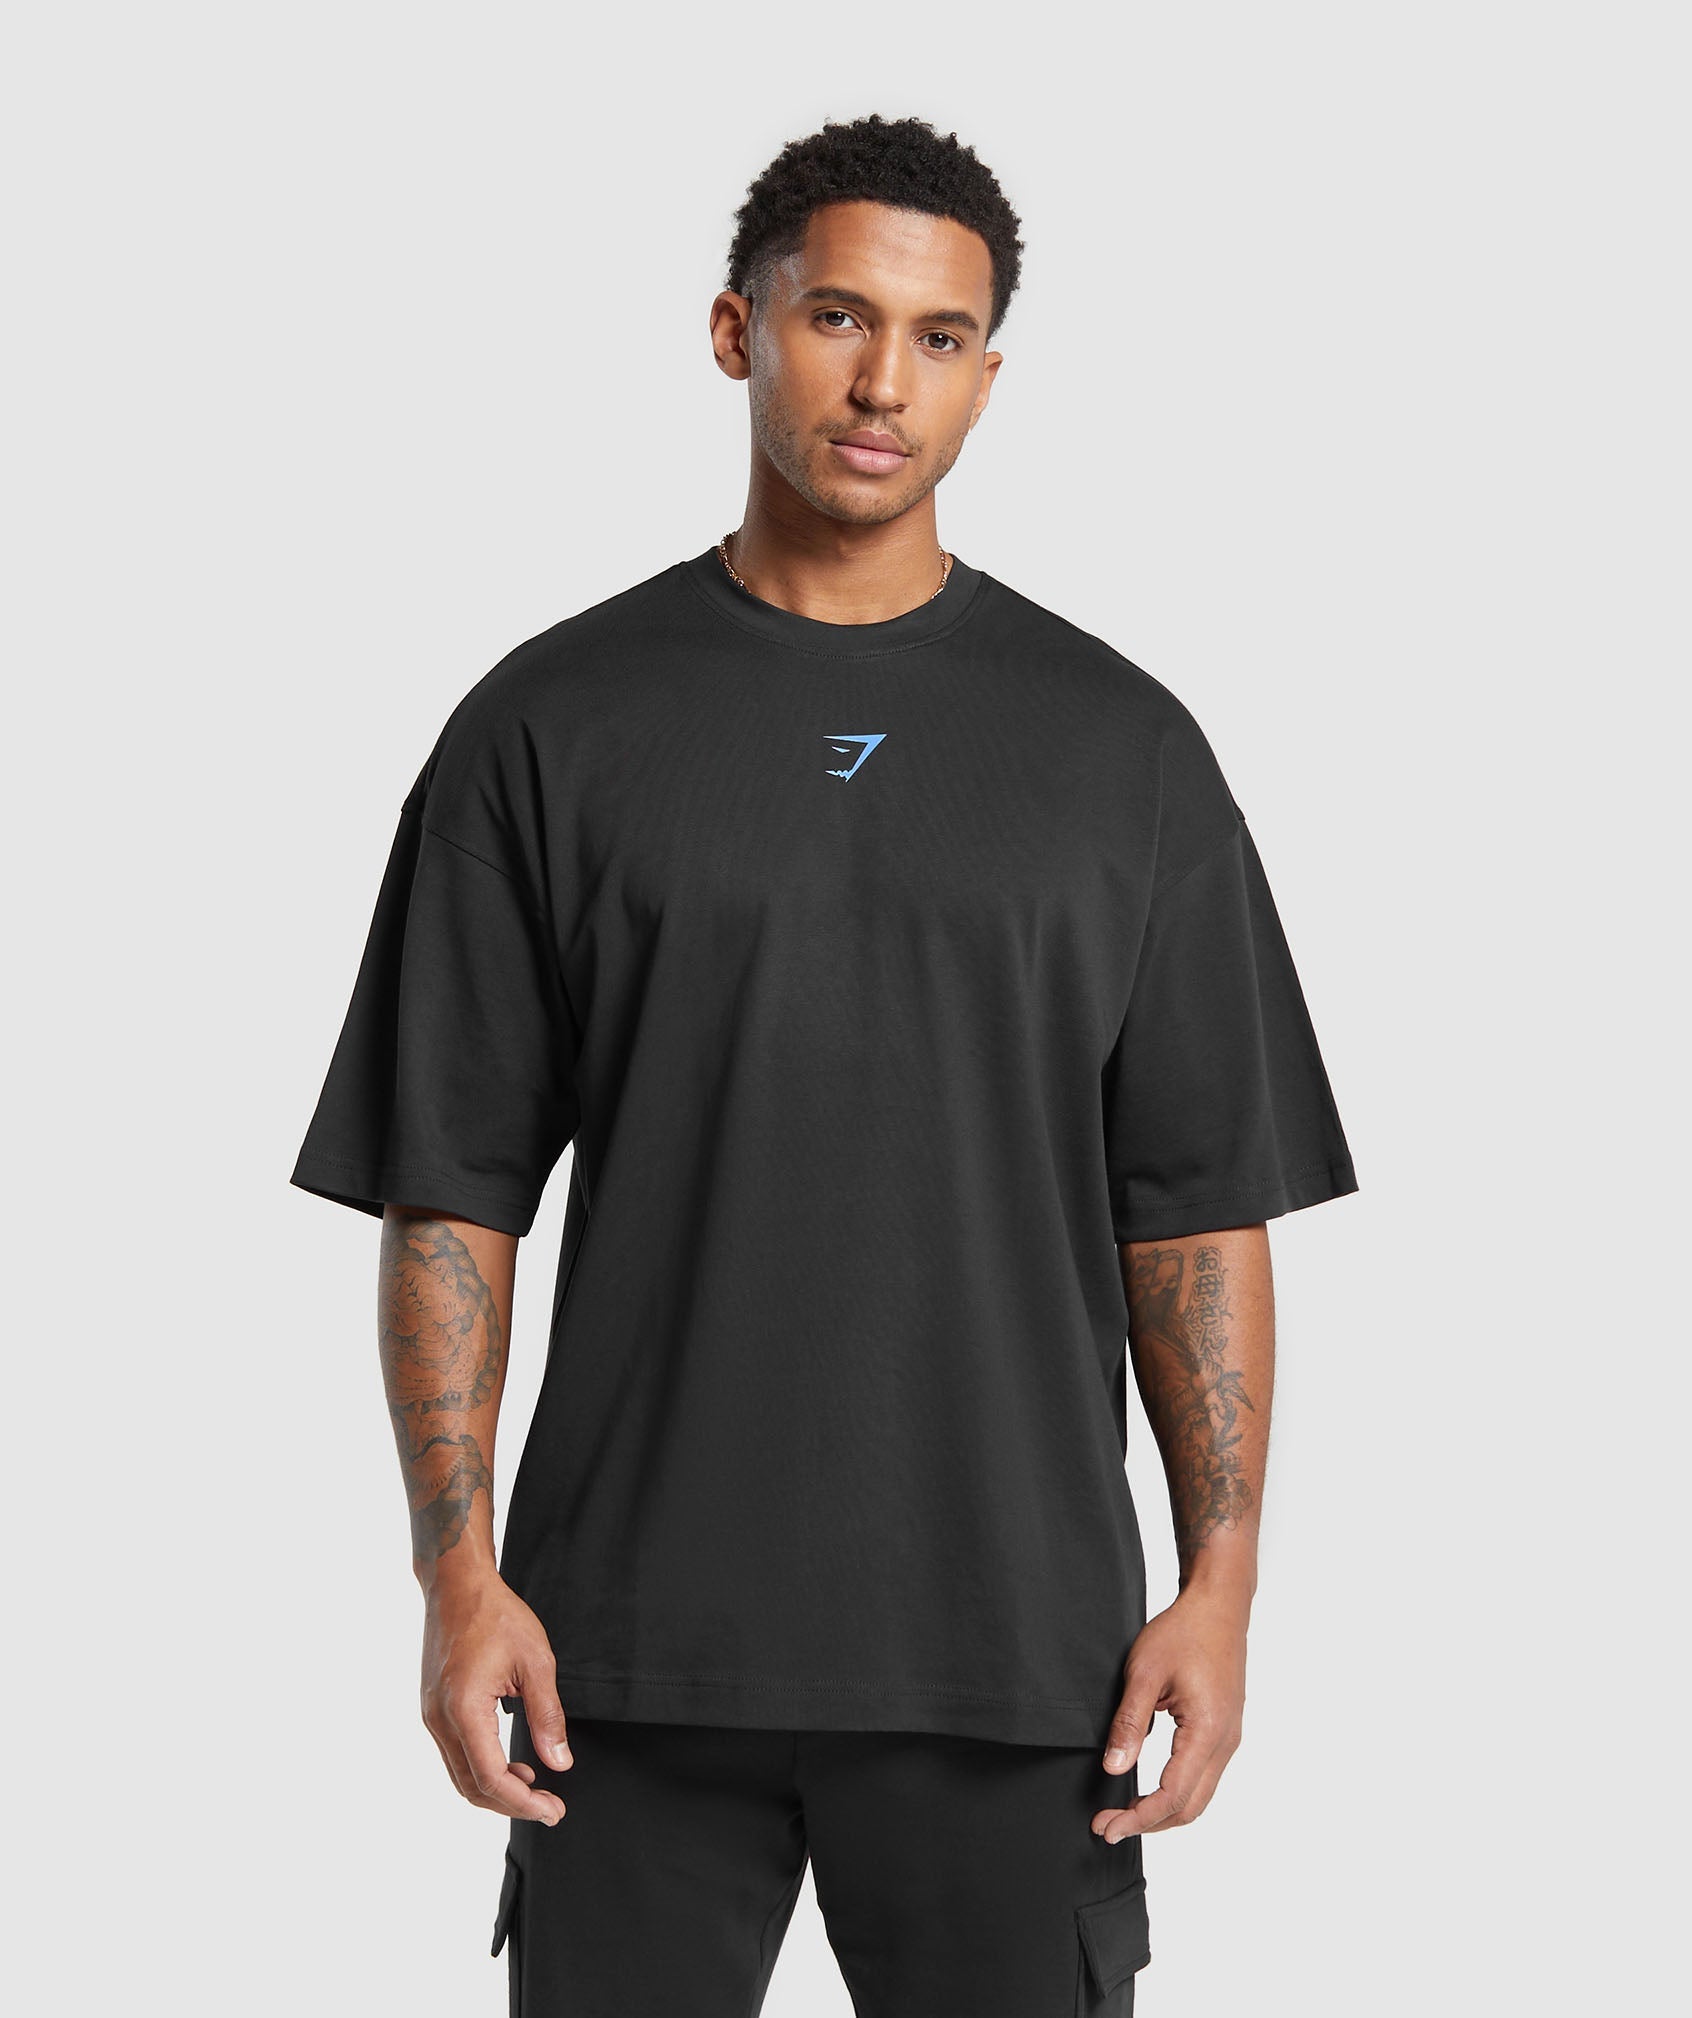 Miami Graphic T-Shirt in Black/Lats Blue - view 2